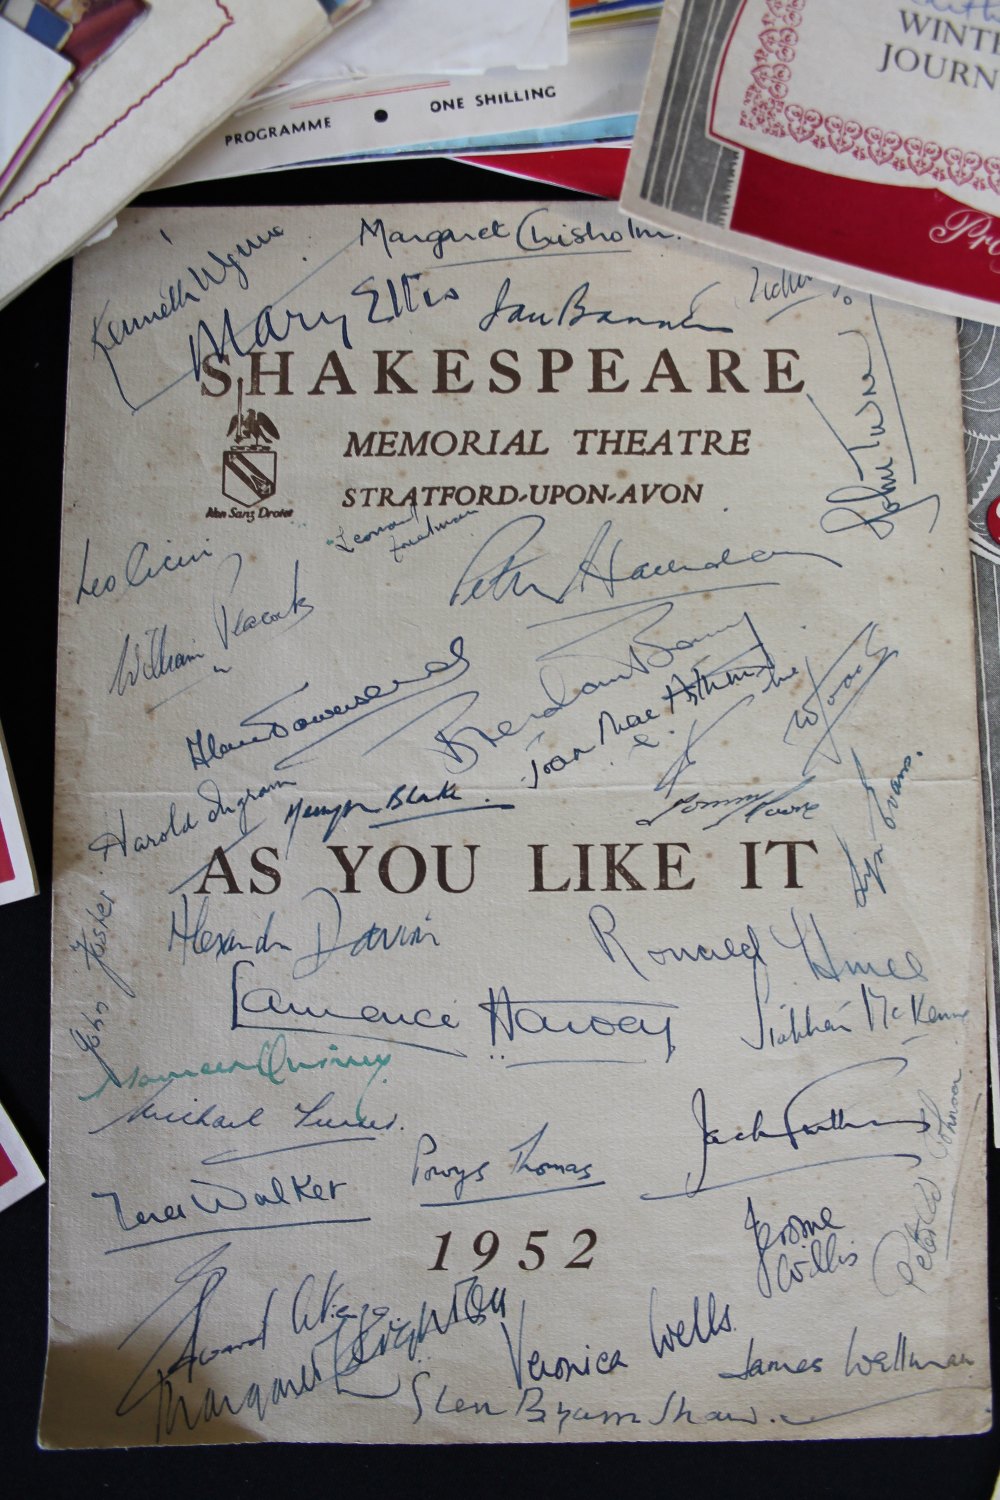 THEATRE PROGRAMMES - a collection of 114 theatre programmes (some signed) from the 1940/80s to - Image 2 of 2